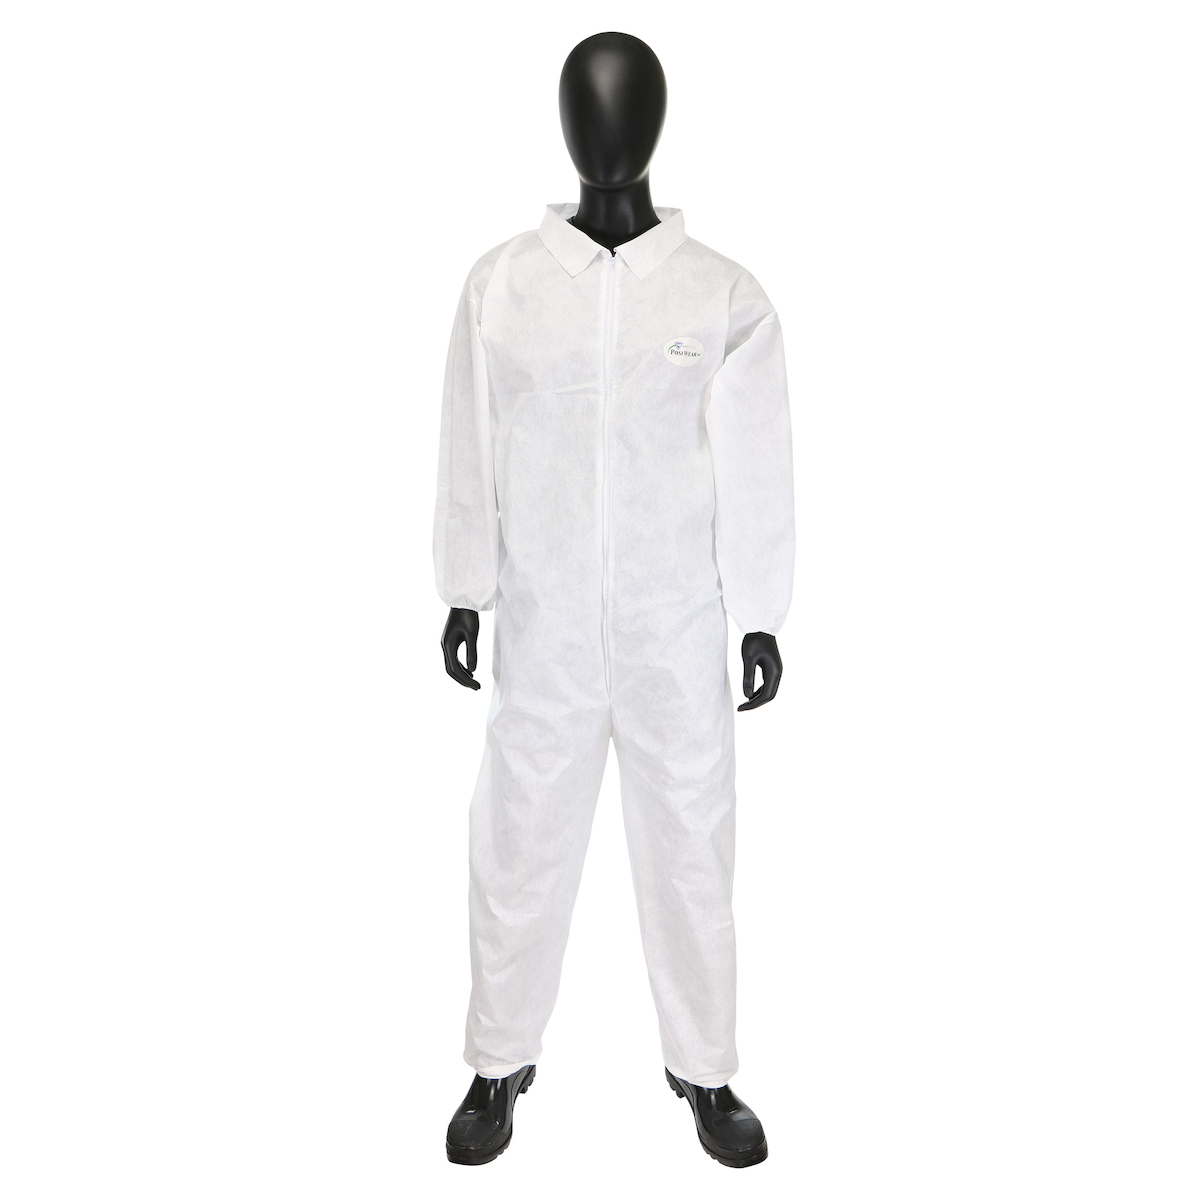 Posi-Wear® M3™ White SMMMS Coverall with Elastic Wrist and Ankle